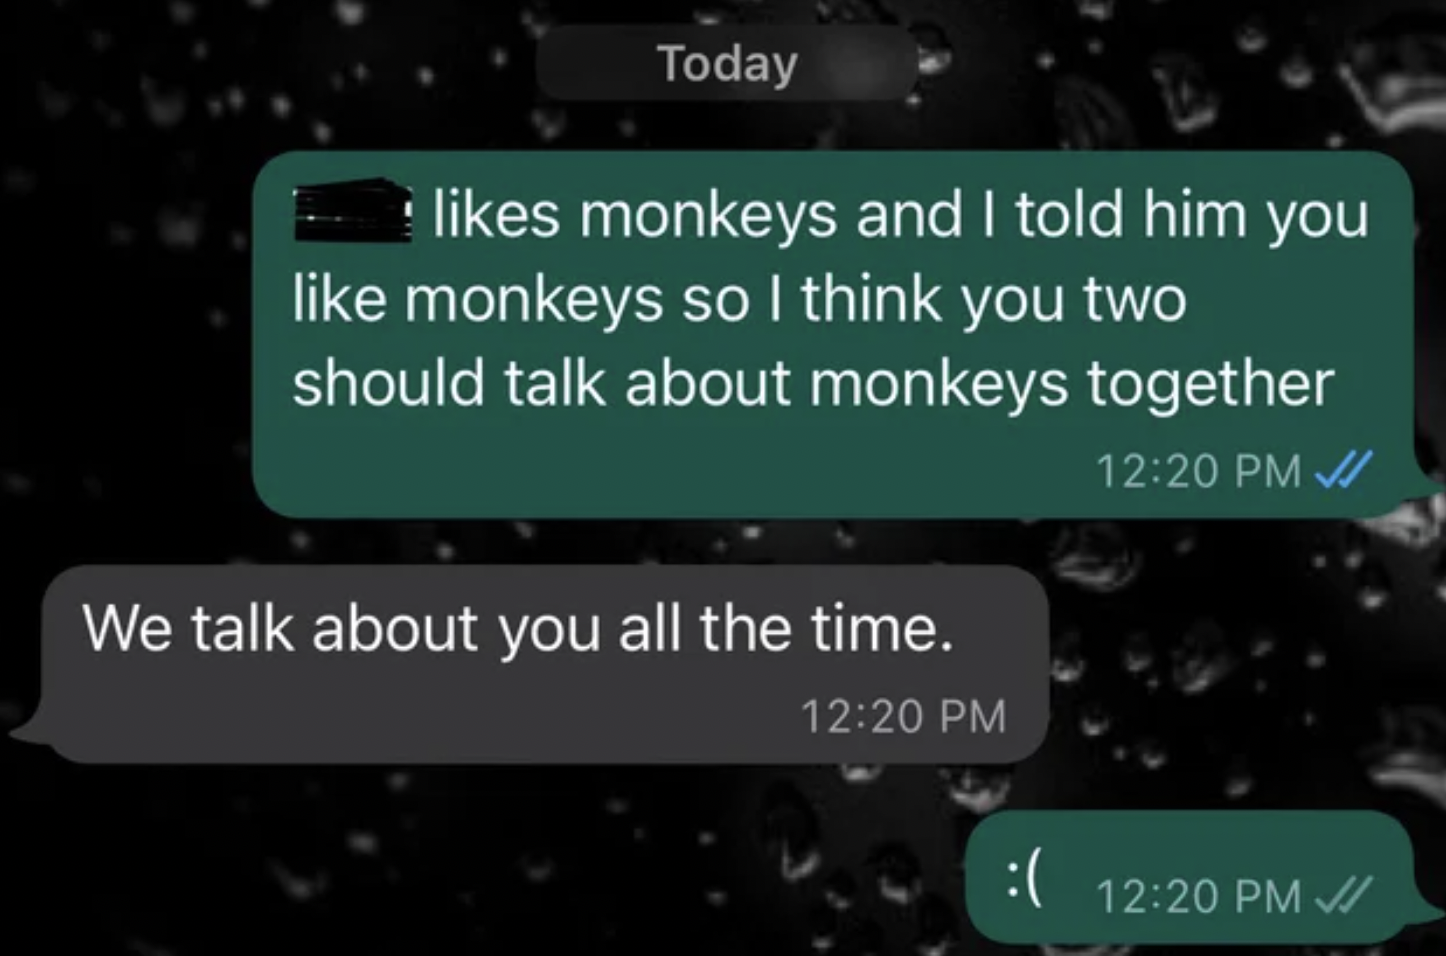 Murdered by Words - multimedia - Today monkeys and I told him you monkeys so I think you two should talk about monkeys together We talk about you all the time.